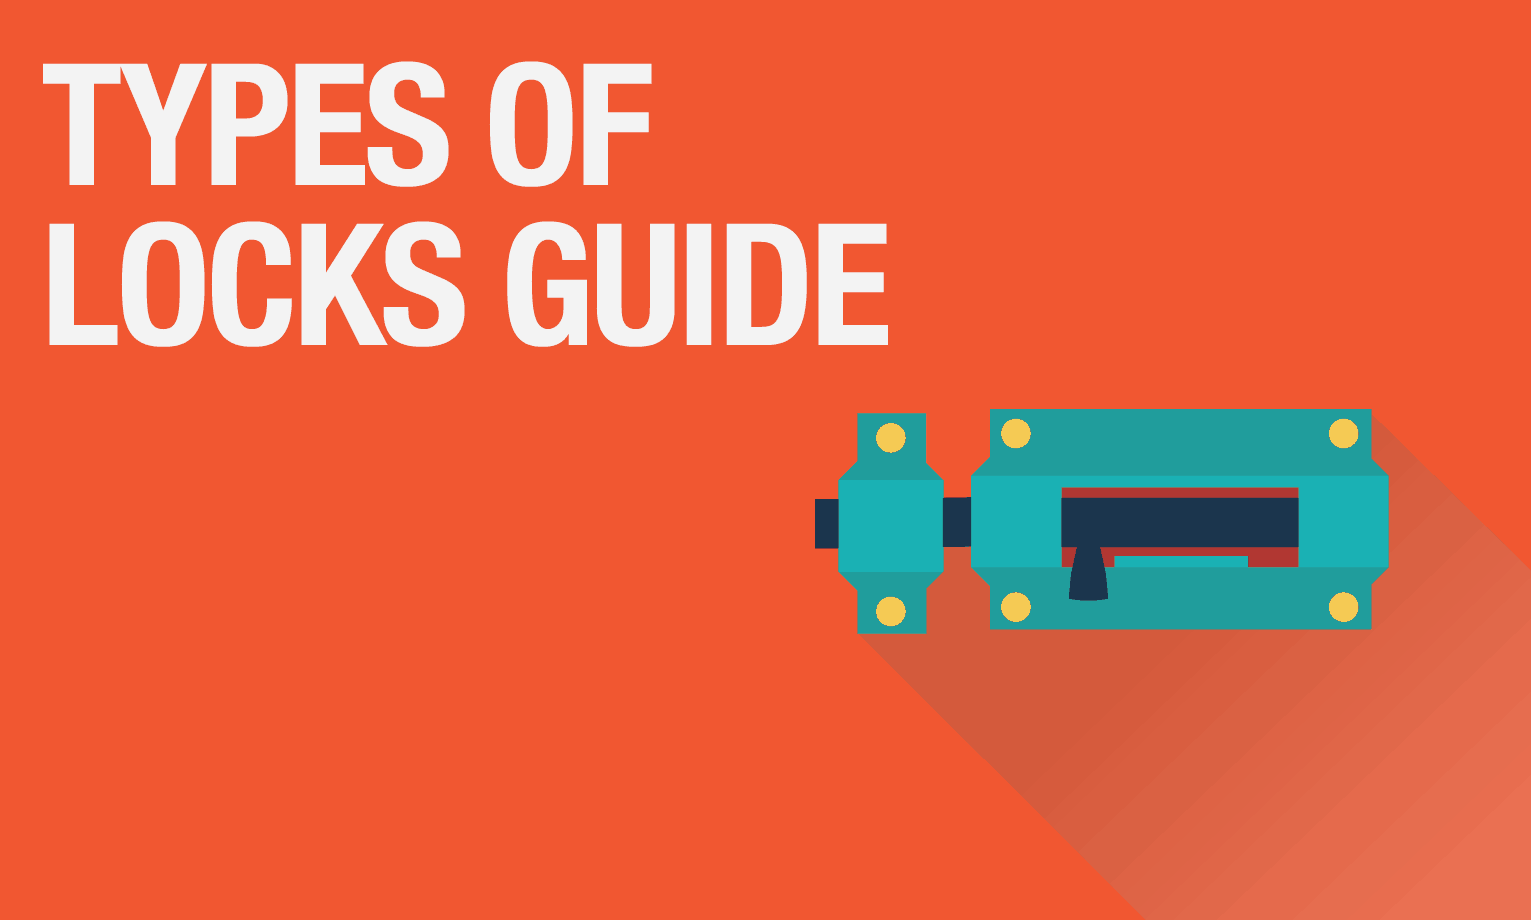 PICKER OF LOCKS - FEATURE IMAGE - TYPES OF LOCKS GUIDE